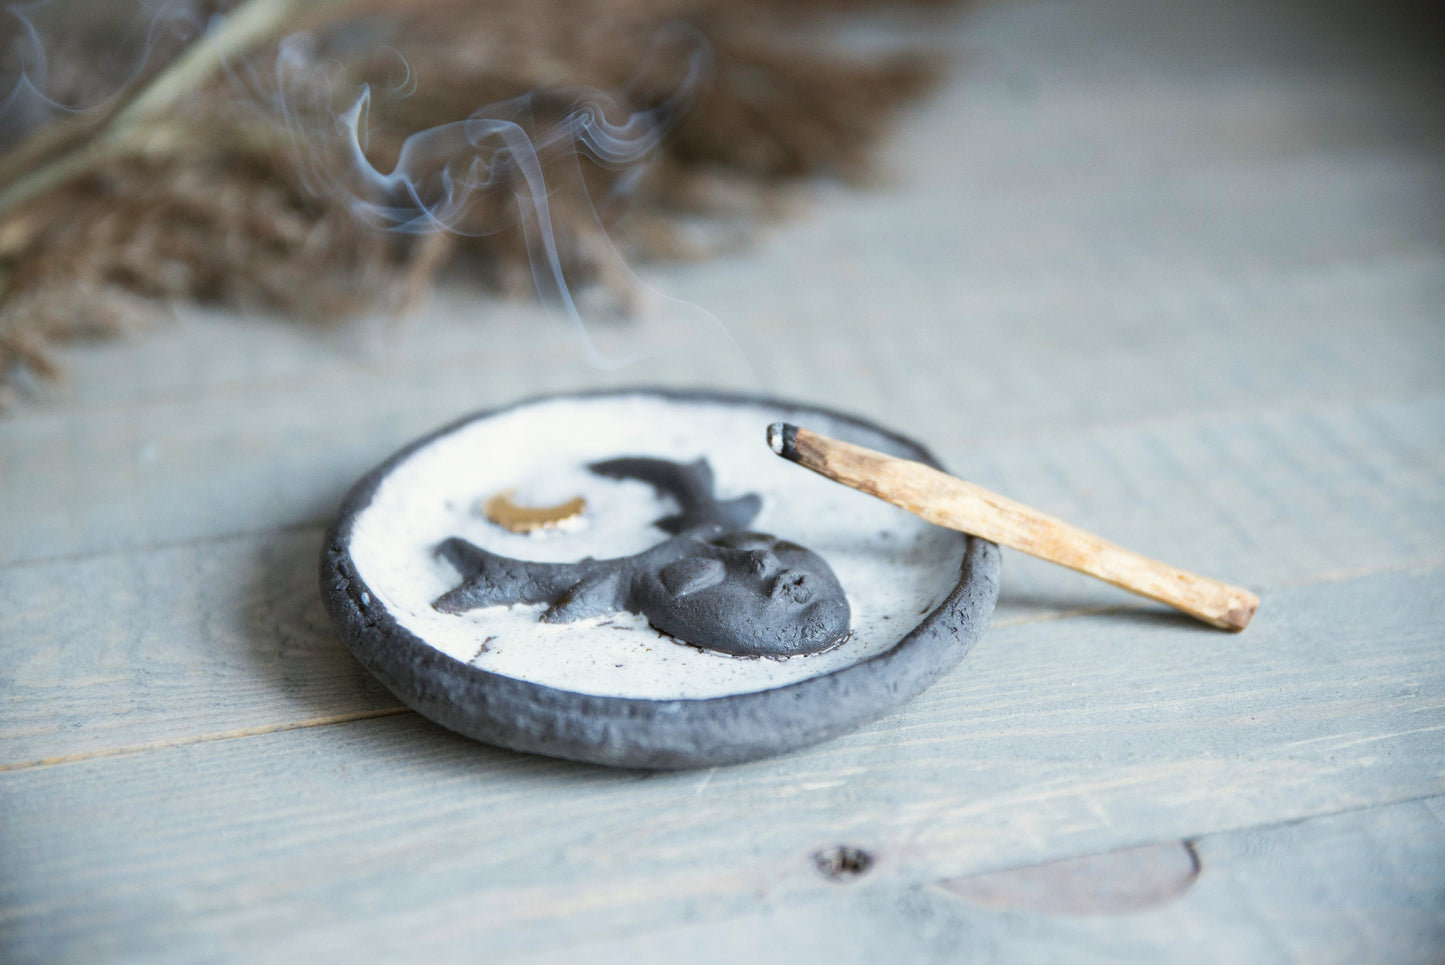 Incense holder with young moon and mystic creature - Palo santo incense burner - Ceramic candle plate